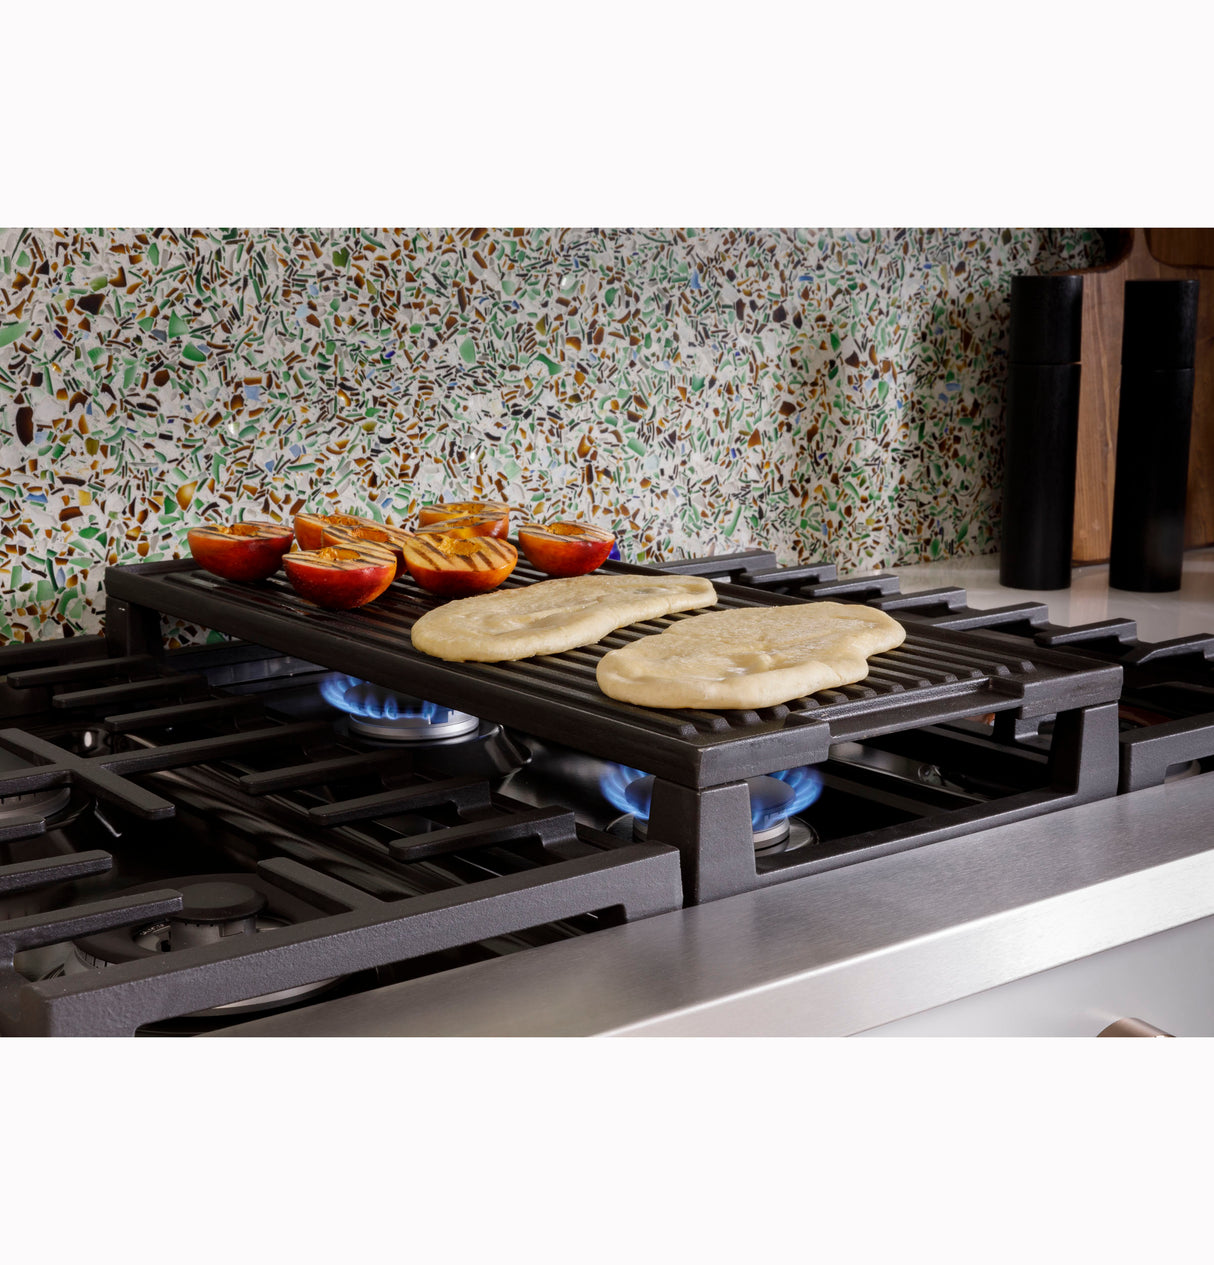 Caf(eback)(TM) 48" Commercial-Style Gas Rangetop with 6 Burners and Integrated Griddle (Natural Gas) - (CGU486P3TD1)